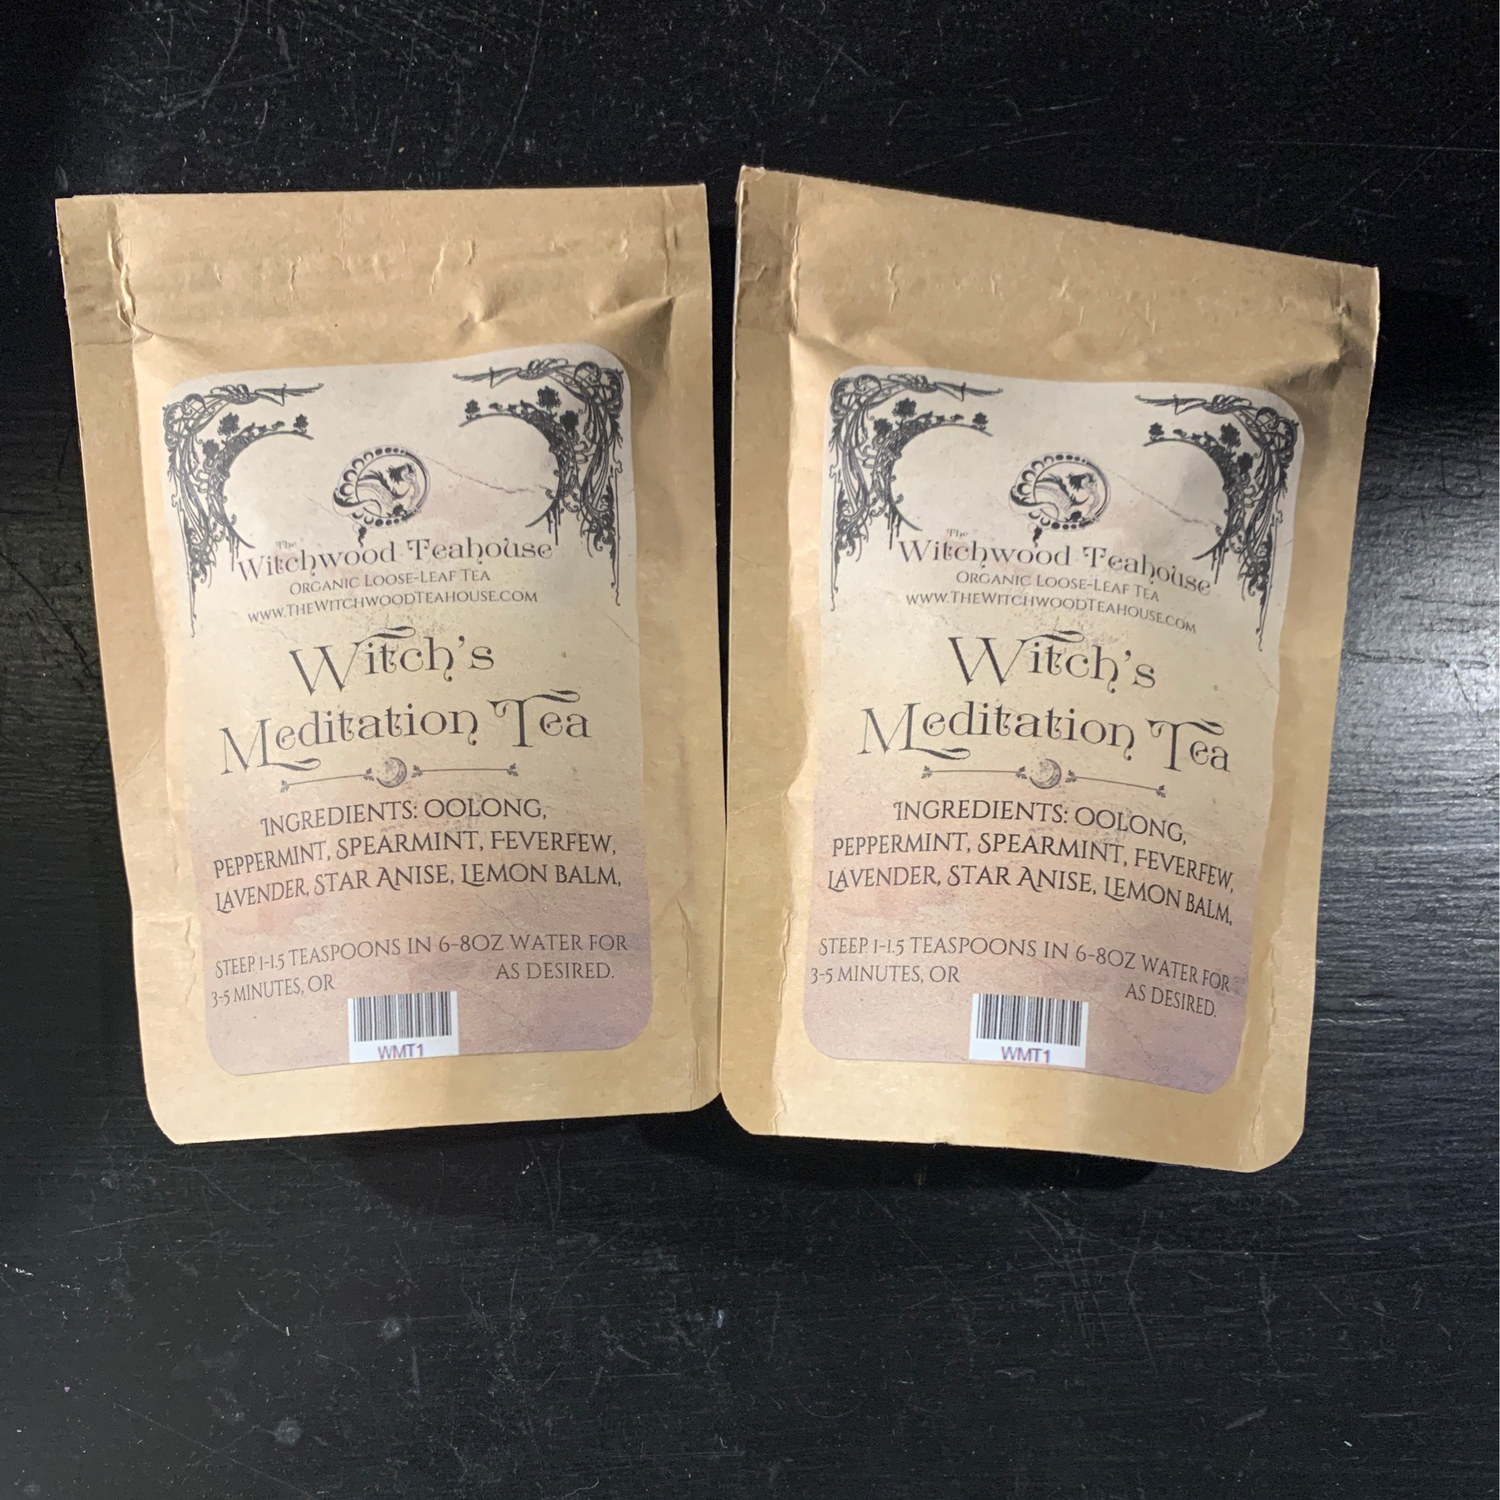 Witchwood Teahouse Witchs Meditation Tea